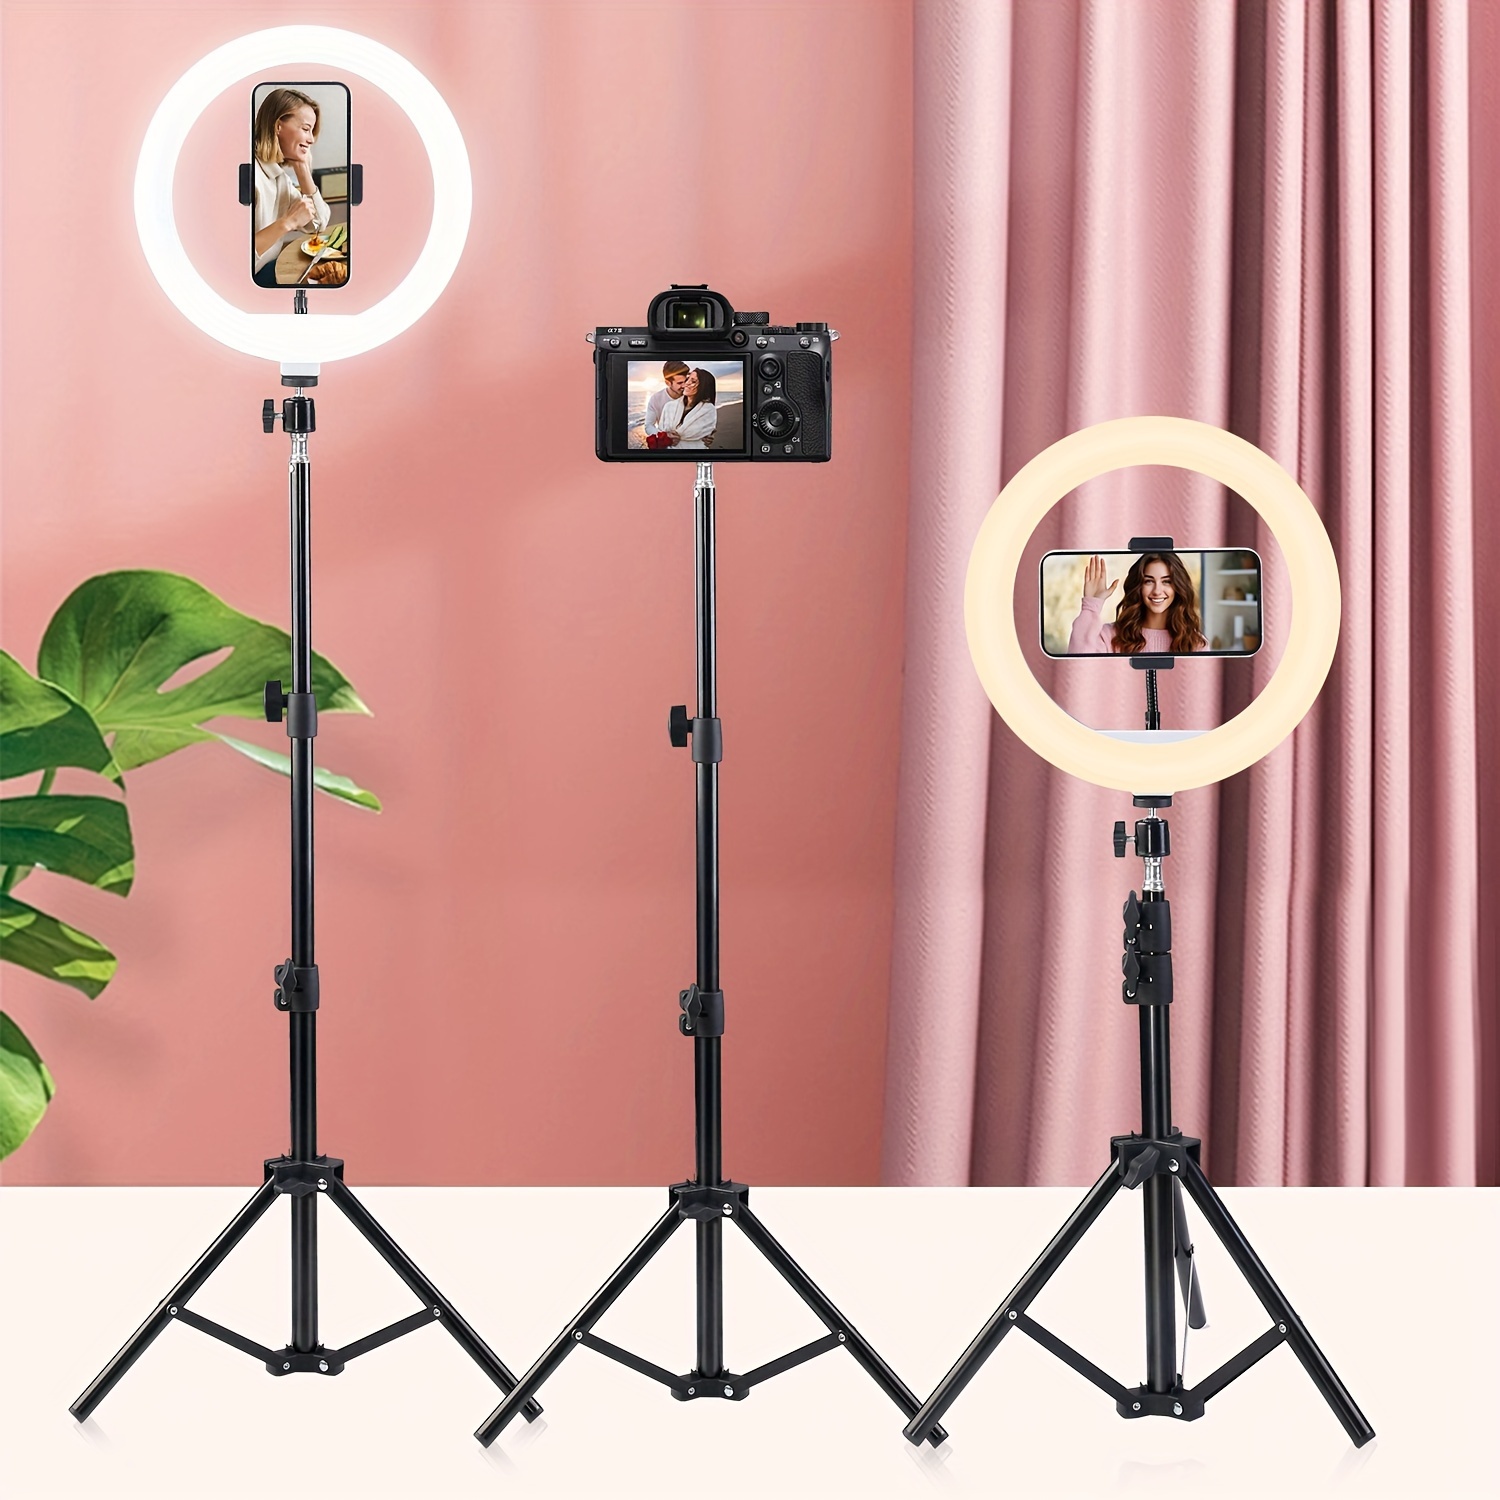 10 LED Ring Light with Tripod Stand & Phone Holder for Live